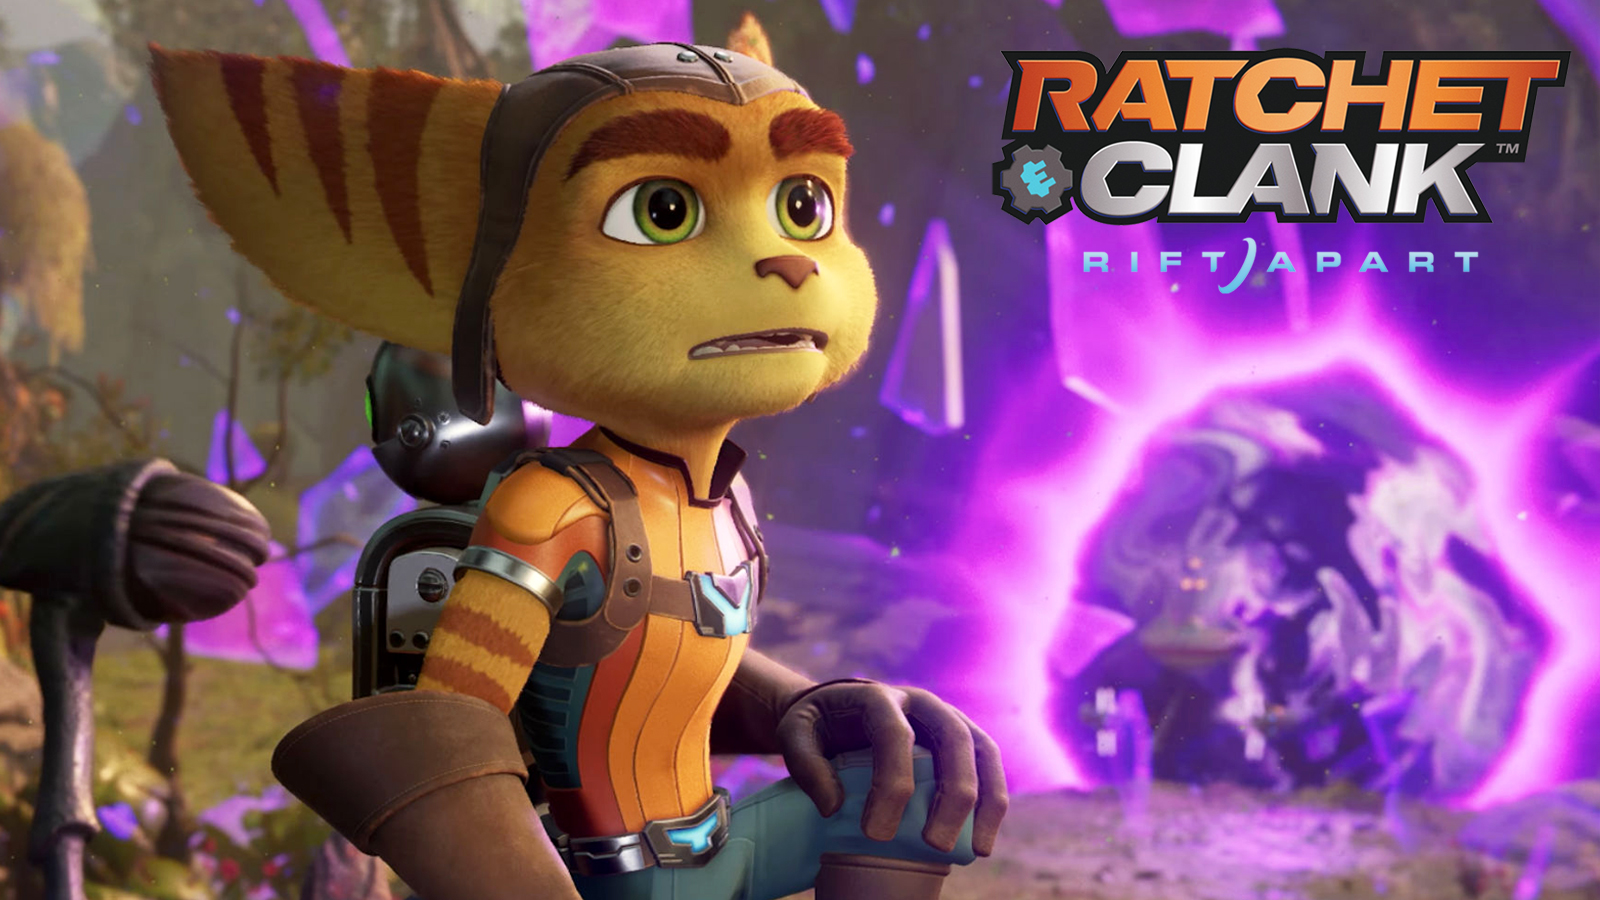 Ratchet and Clank Rift Apart release date trailer, plot, new weapons